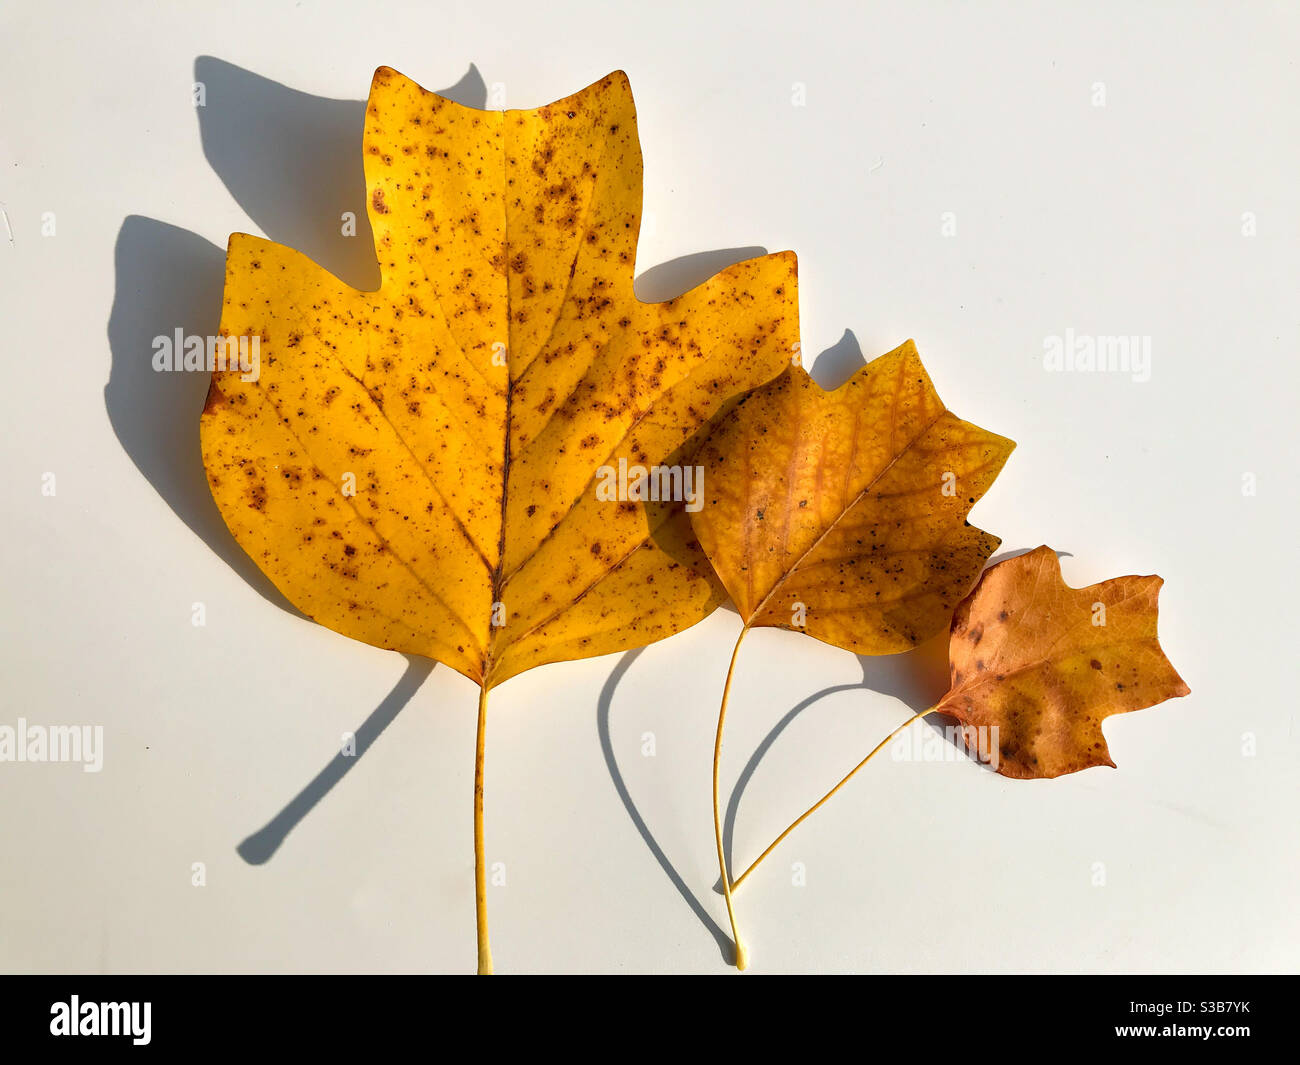 Three yellow tulip tree leaves, one small leader,one medium and one large on white background Stock Photo